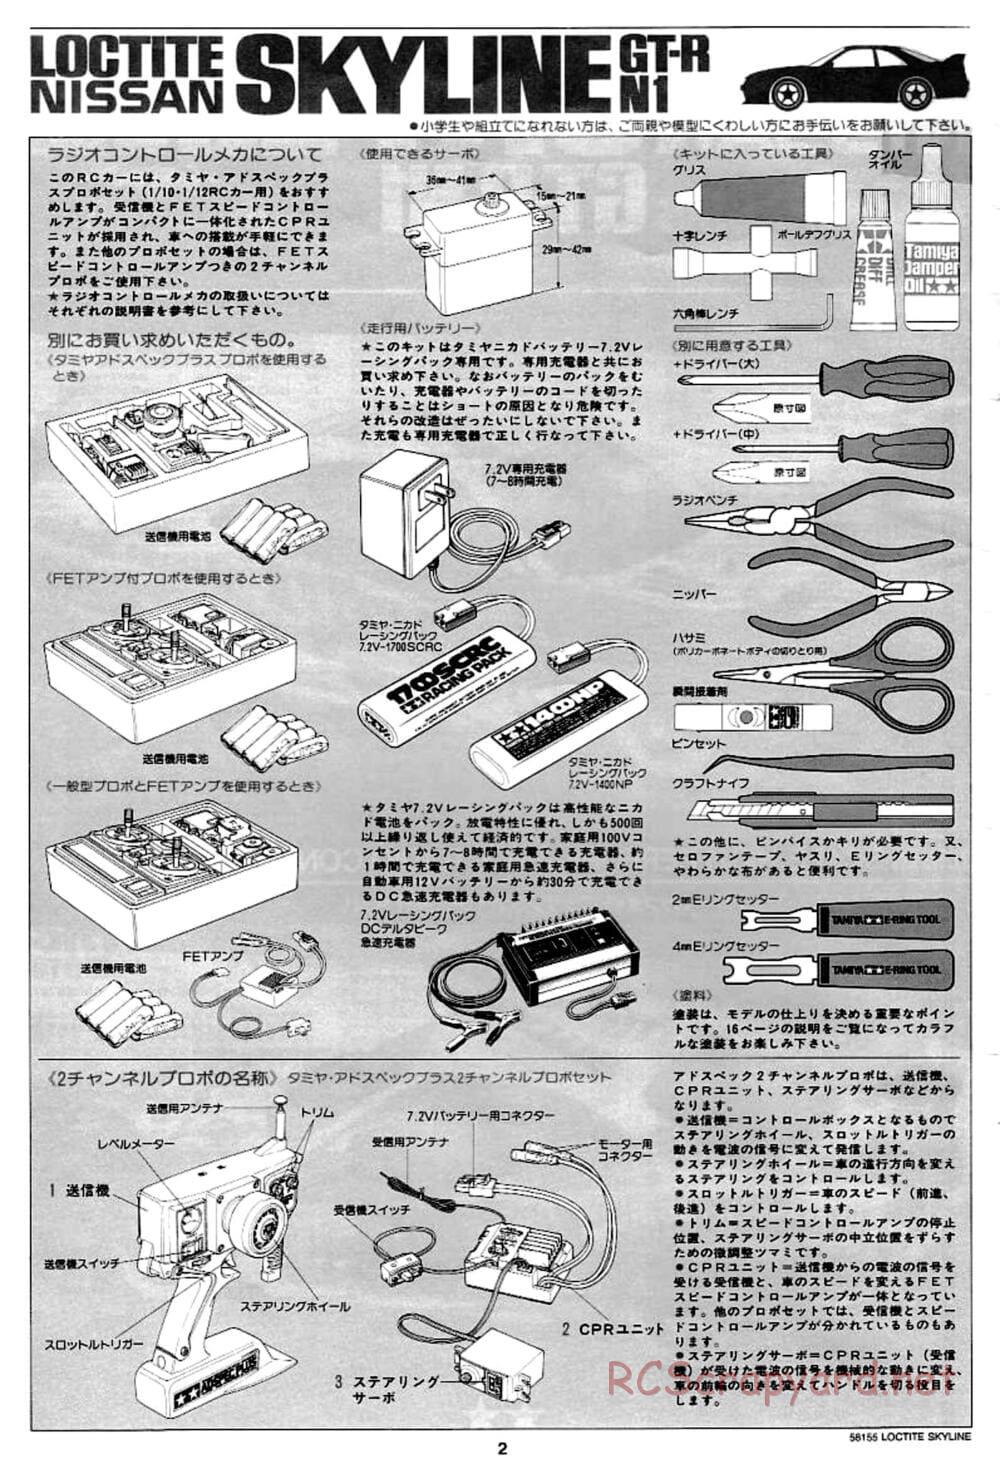 Tamiya - Loctite Nissan Skyline GT-R N1 - TA-02 Chassis - Manual - Page 2